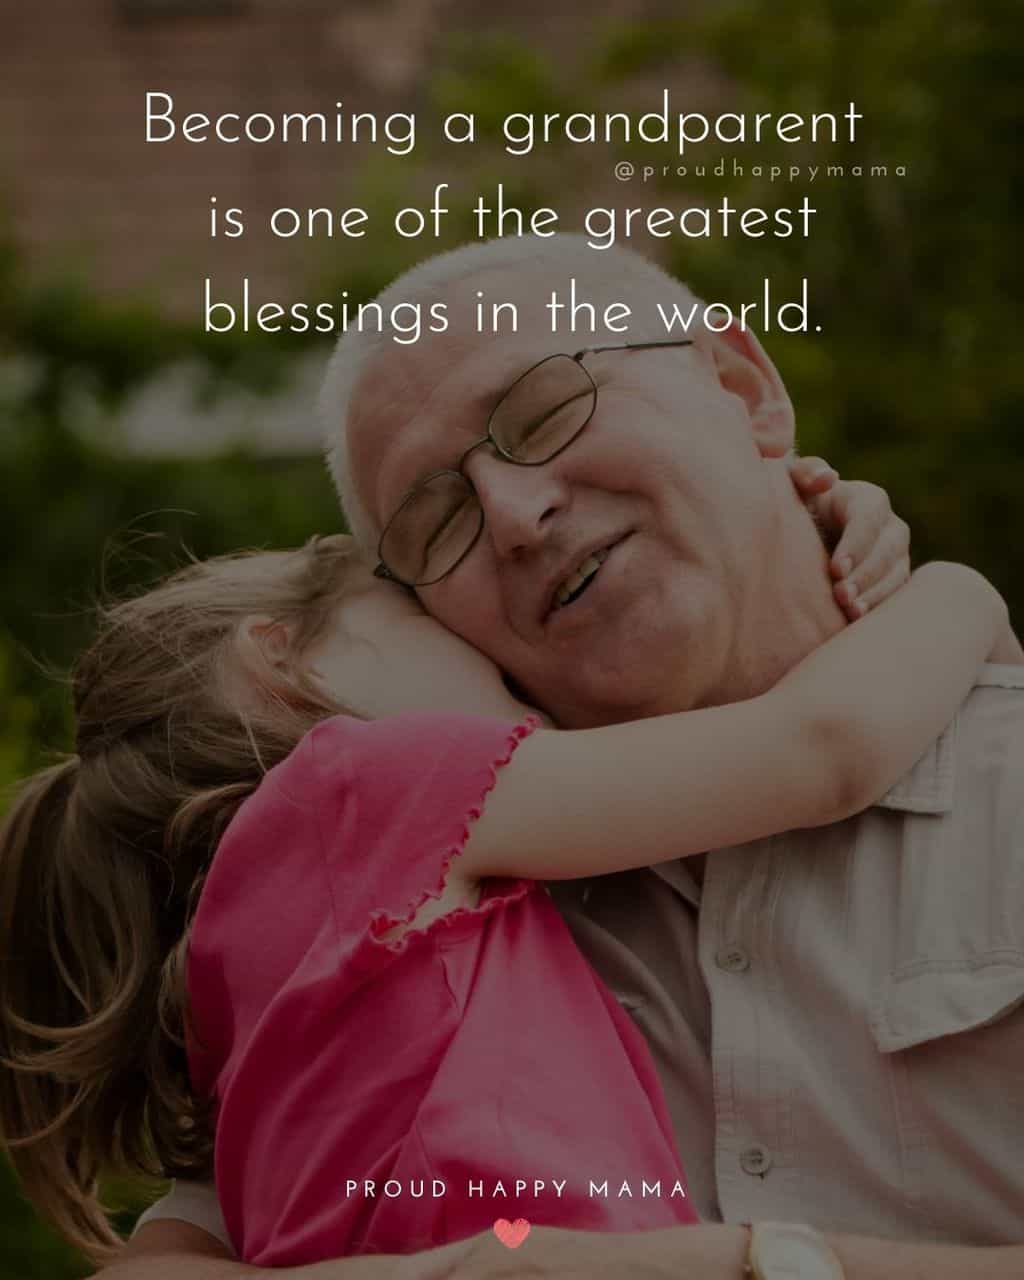 Grandparent Quotes – Becoming a grandparent is one of the greatest blessings in the world.’